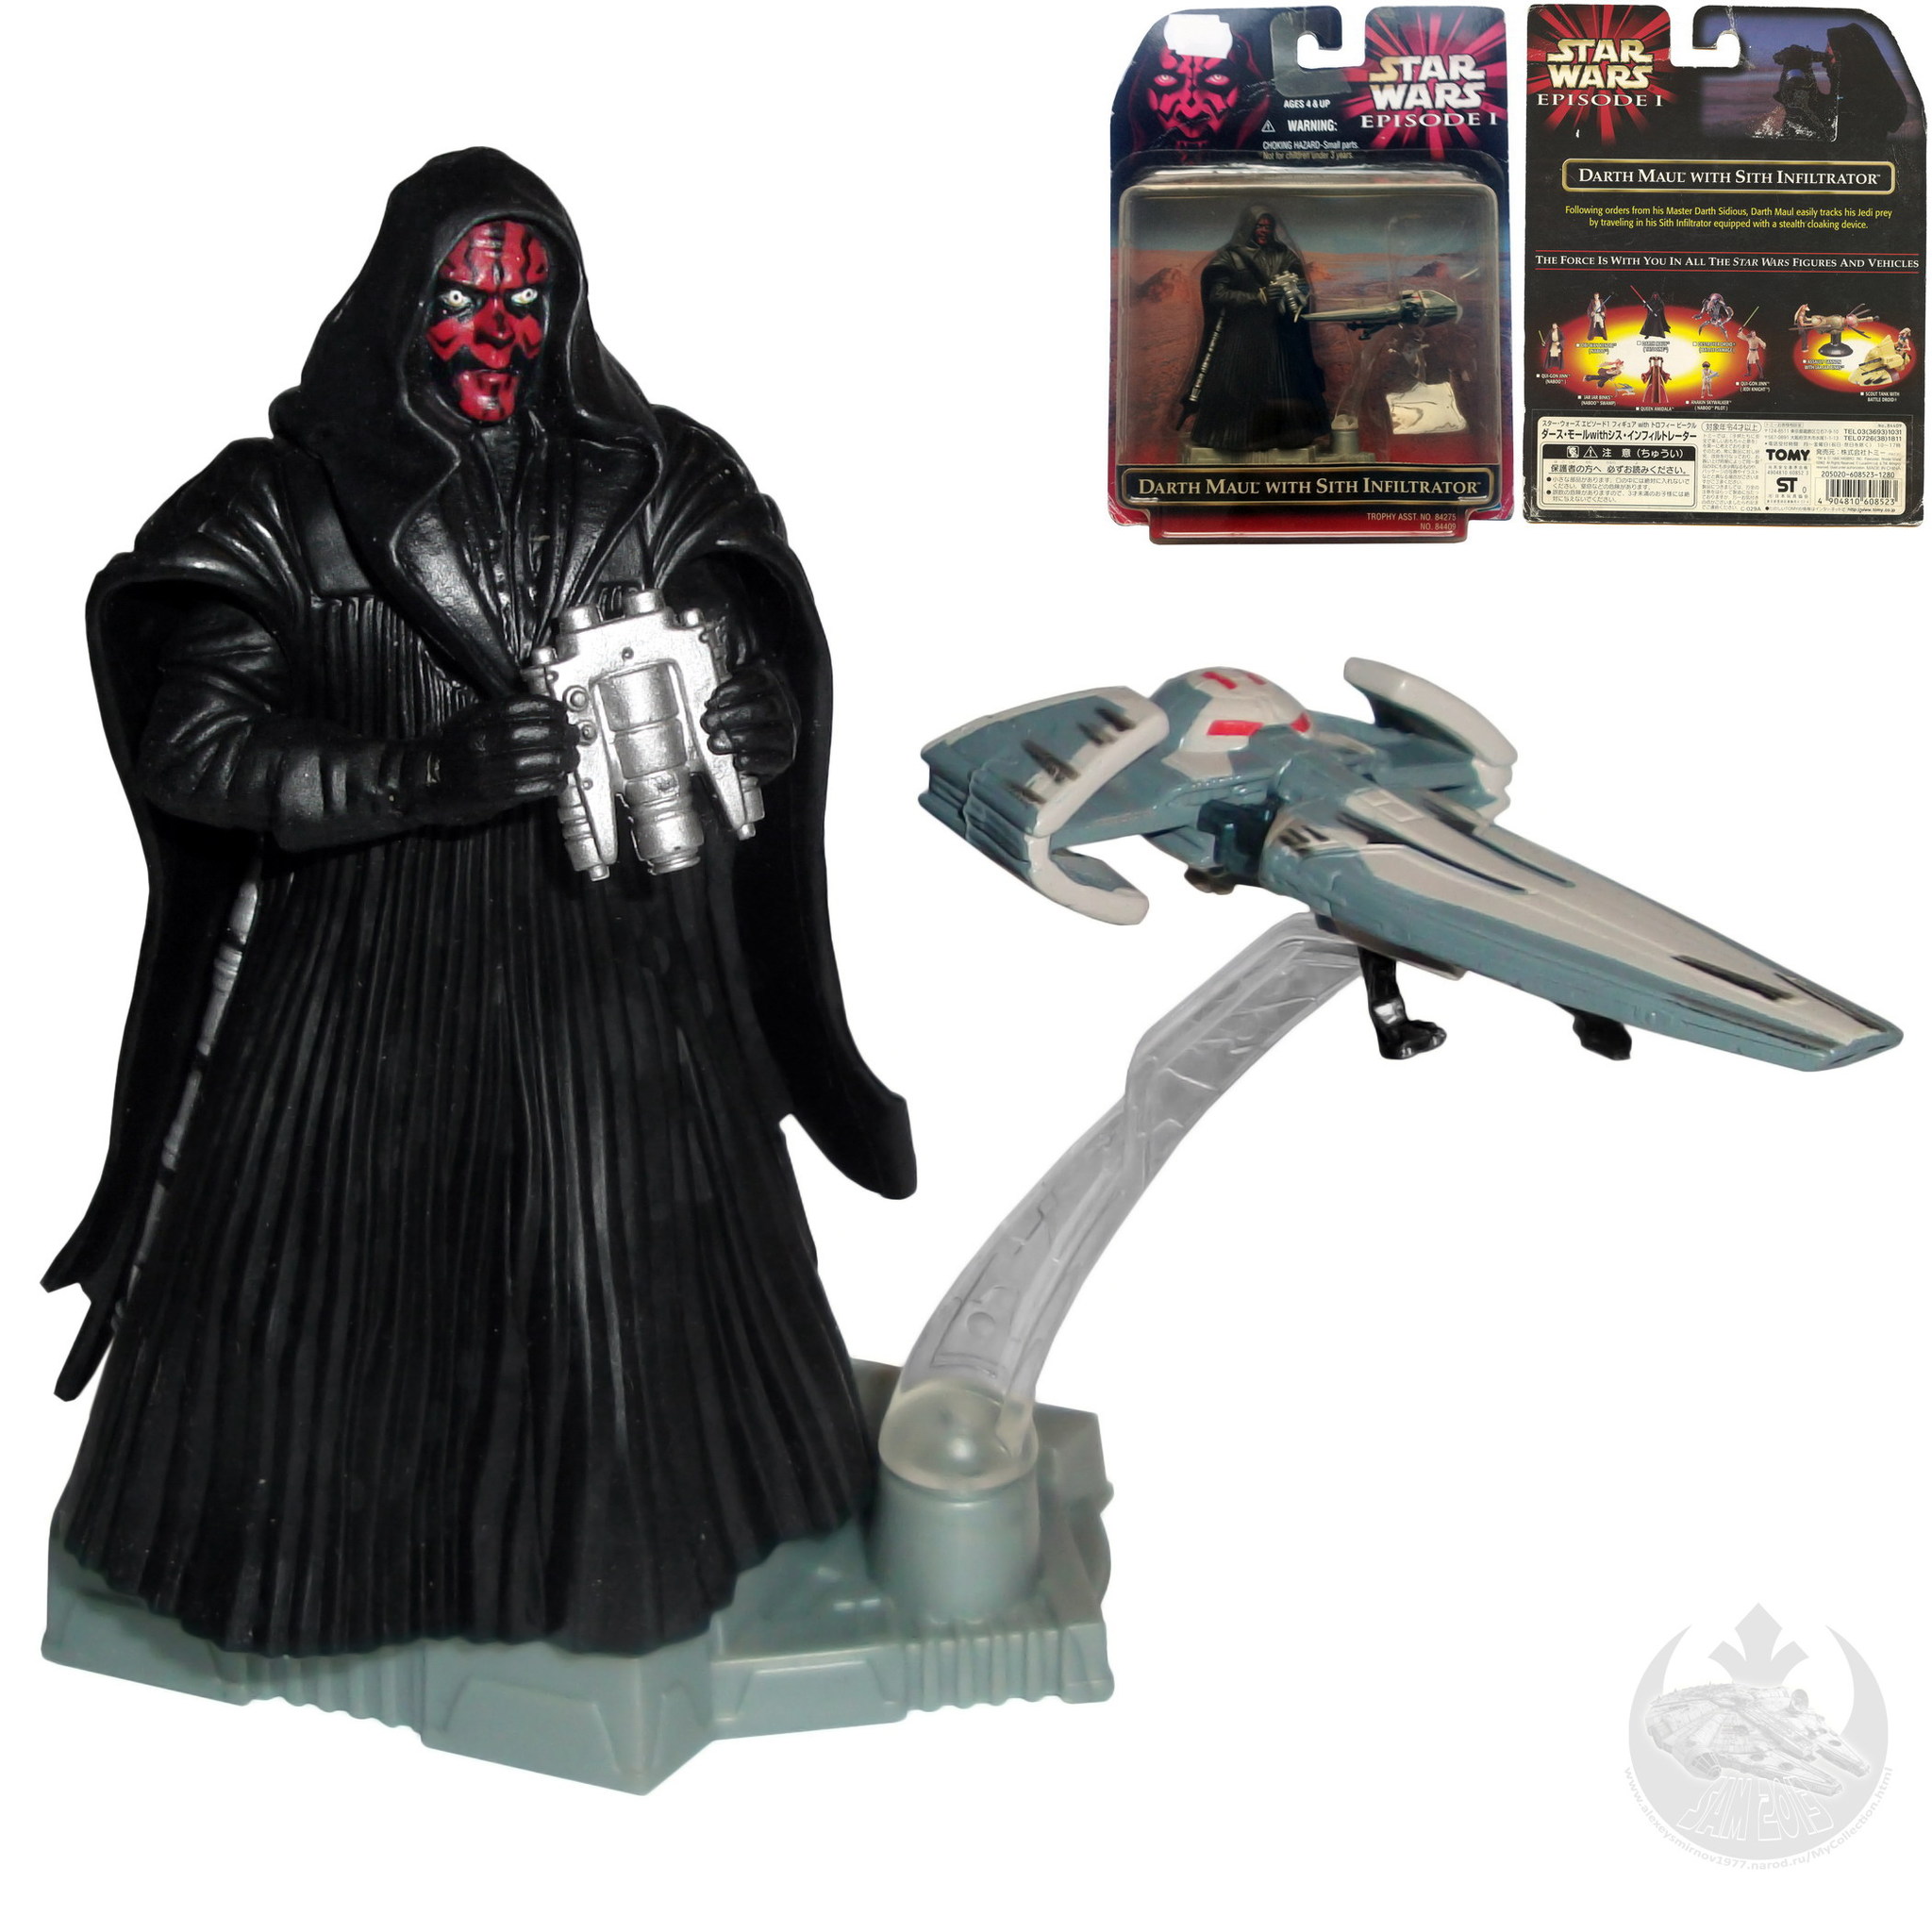 Star Wars Episode I - Darth Maul With Sith Infiltrator